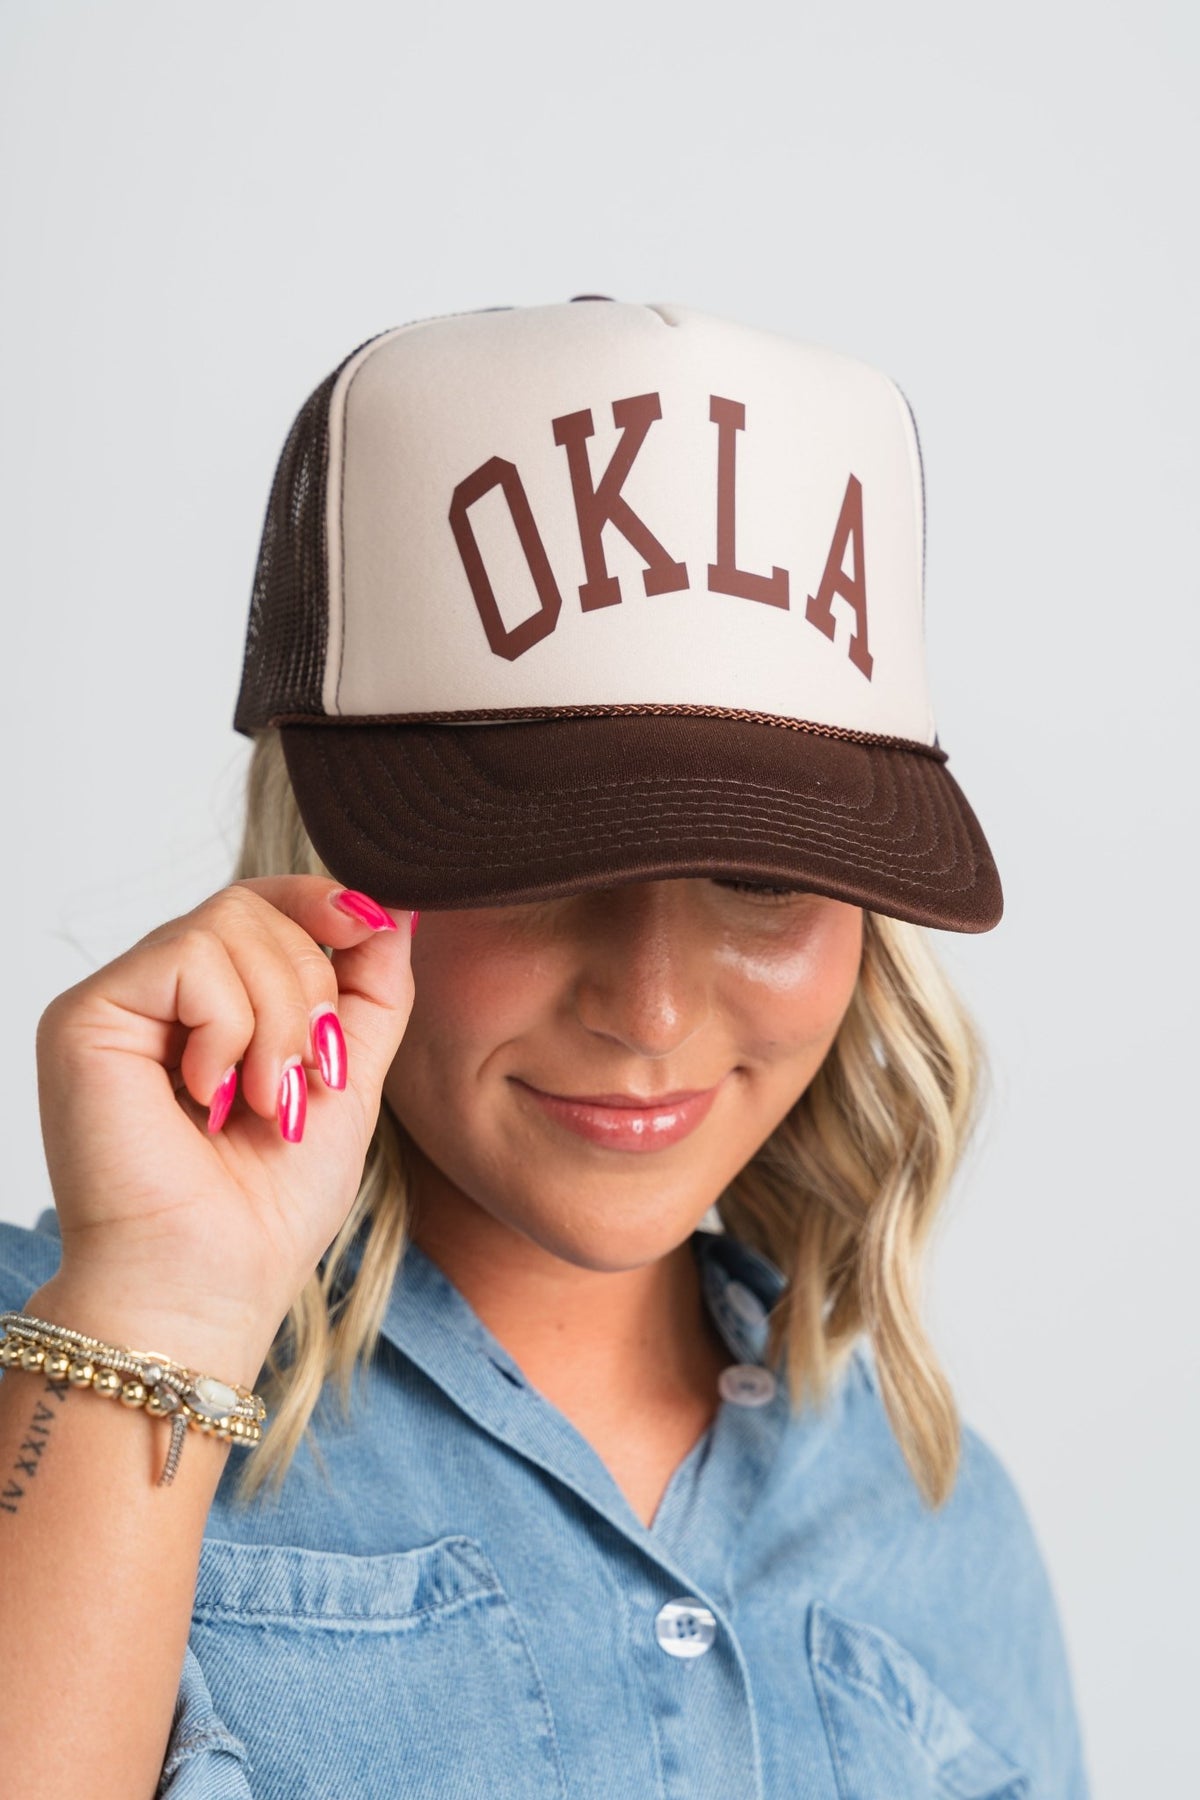 OKLA curved two tone trucker hat khaki/brown - Trendy Hats at Lush Fashion Lounge Boutique in Oklahoma City